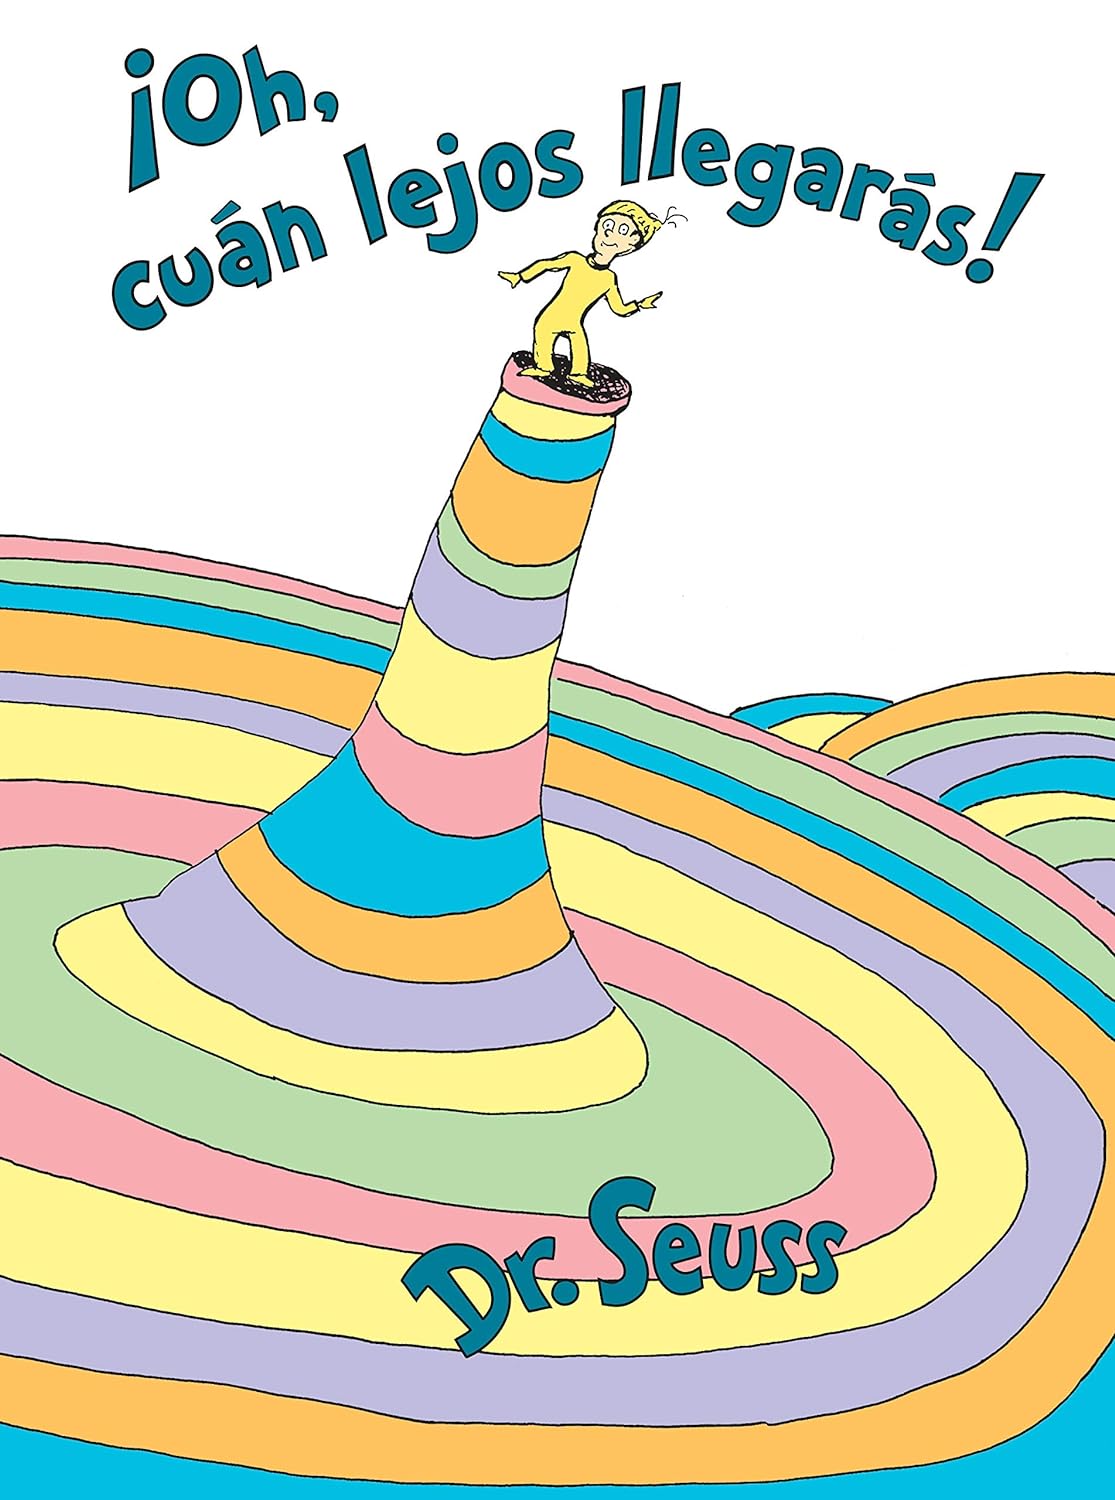 Ã‚Oh, cuan lejos llegaras! (Oh, the Places You'll Go! Spanish Edition)